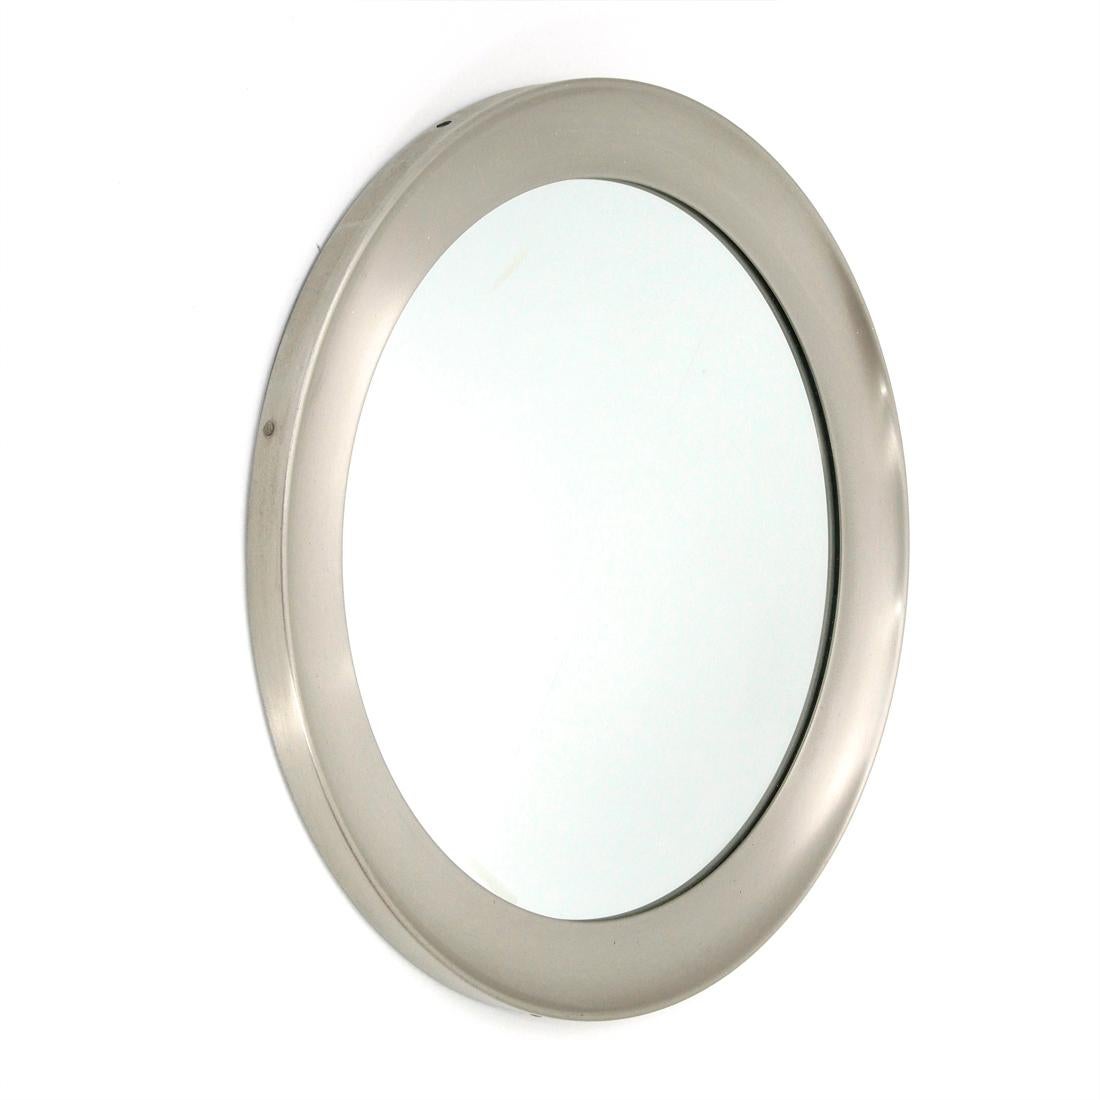 Mirror produced by Artemide in the 1960s on a project by Sergio Mazza.
Circular frame in brushed aluminum.
Back in black painted metal.
Circular mirror.
Good general conditions, some signs and lines due to normal use over time.

Dimensions: